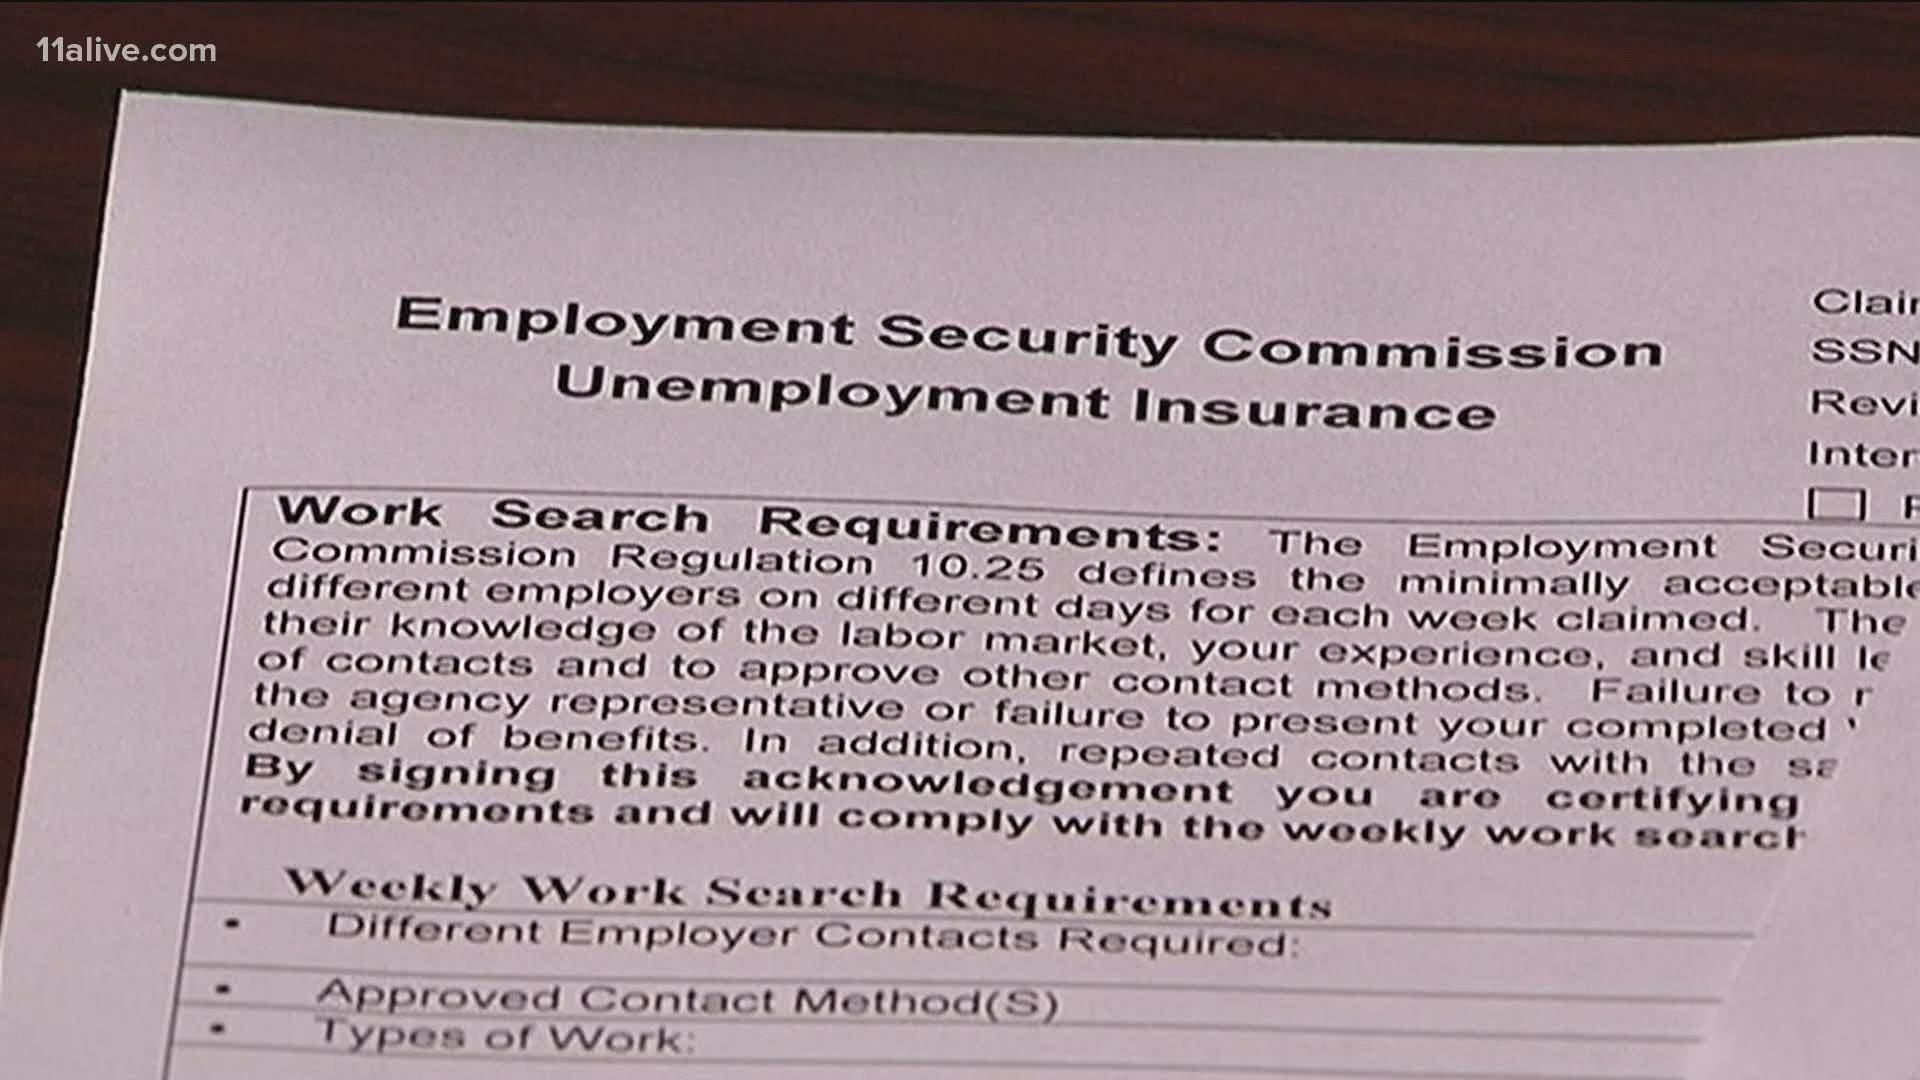 Millions more likely filed for unemployment benefits last week after nearly 39 million sought aid in the previous nine weeks due to the pandemic.